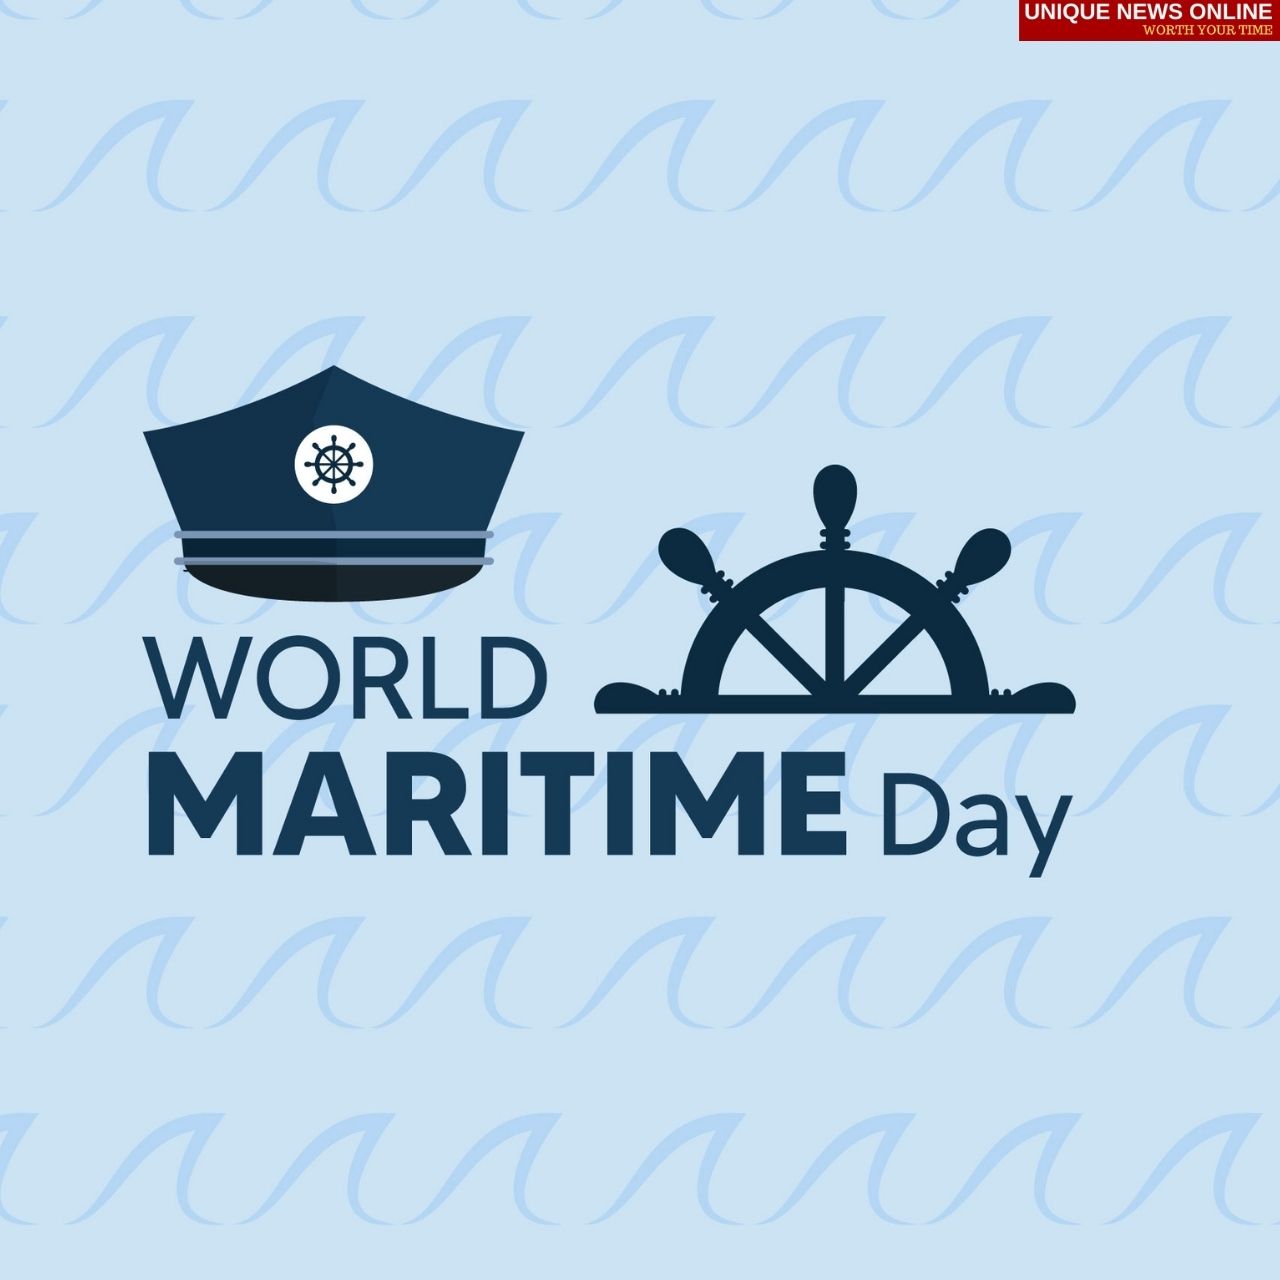 World Maritime Day 2021 Quotes, Wishes, Greetings, Messages, HD Images ...